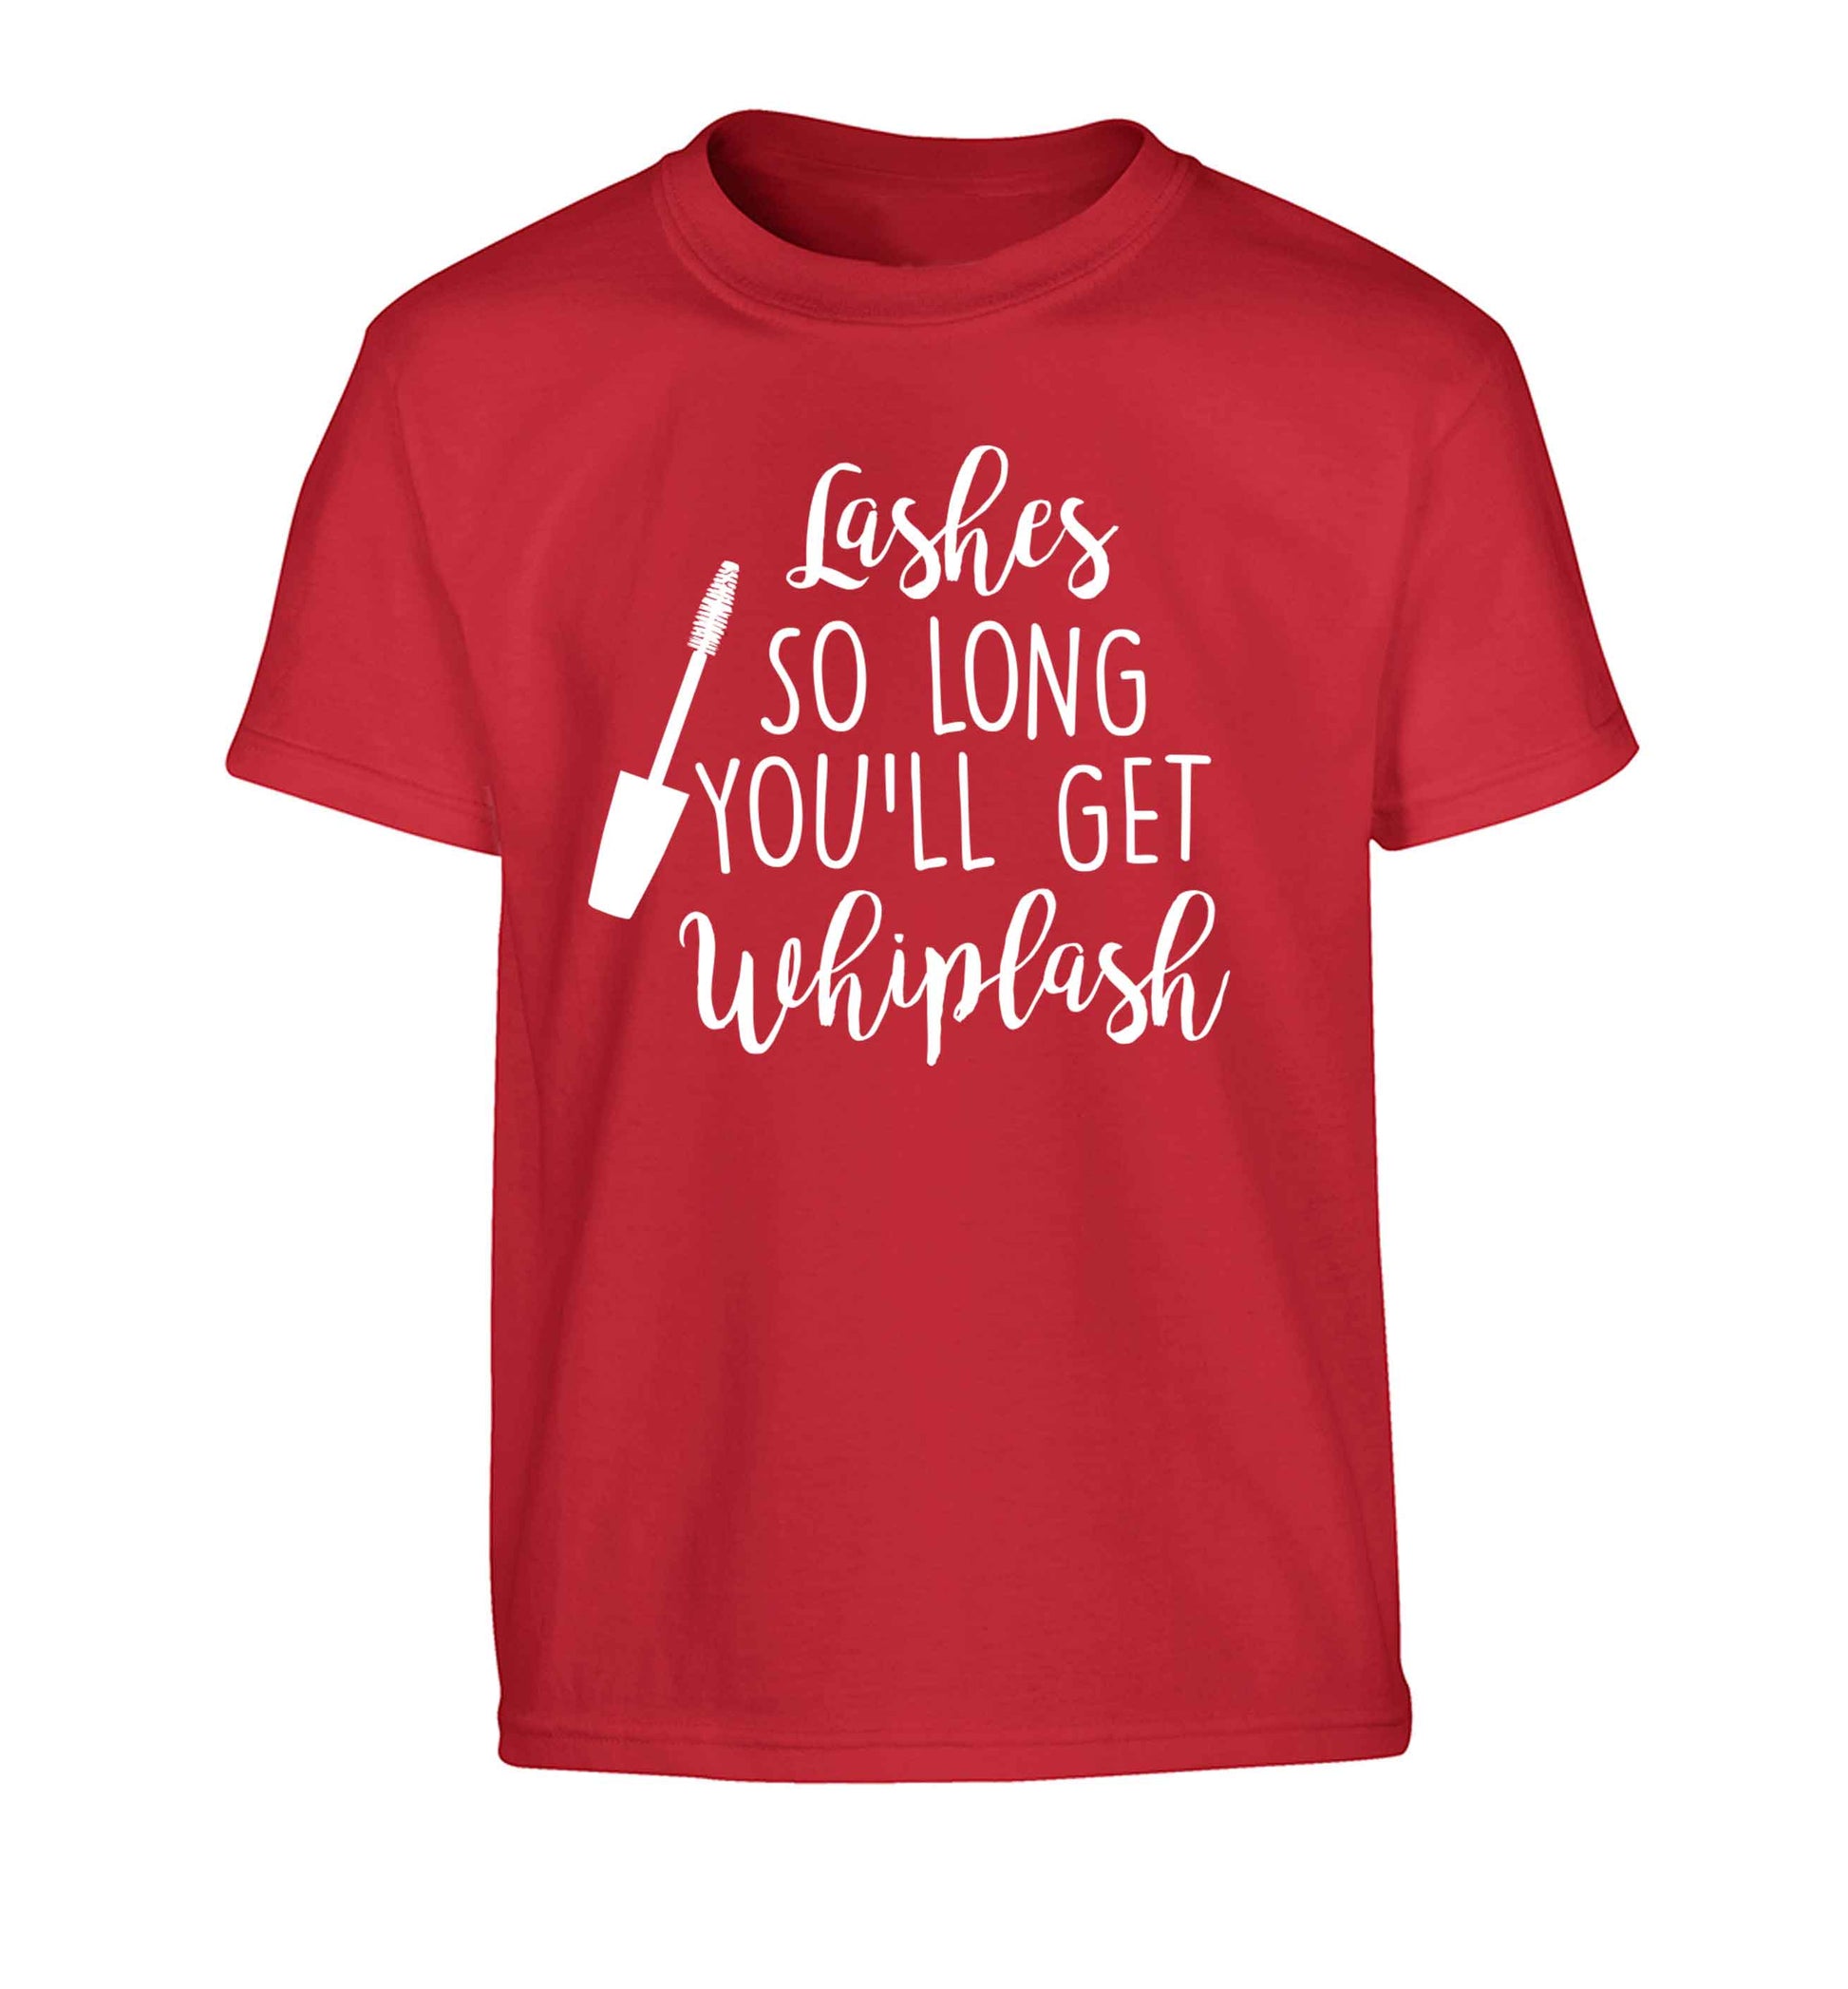 Lashes so long you'll get whiplash Children's red Tshirt 12-13 Years